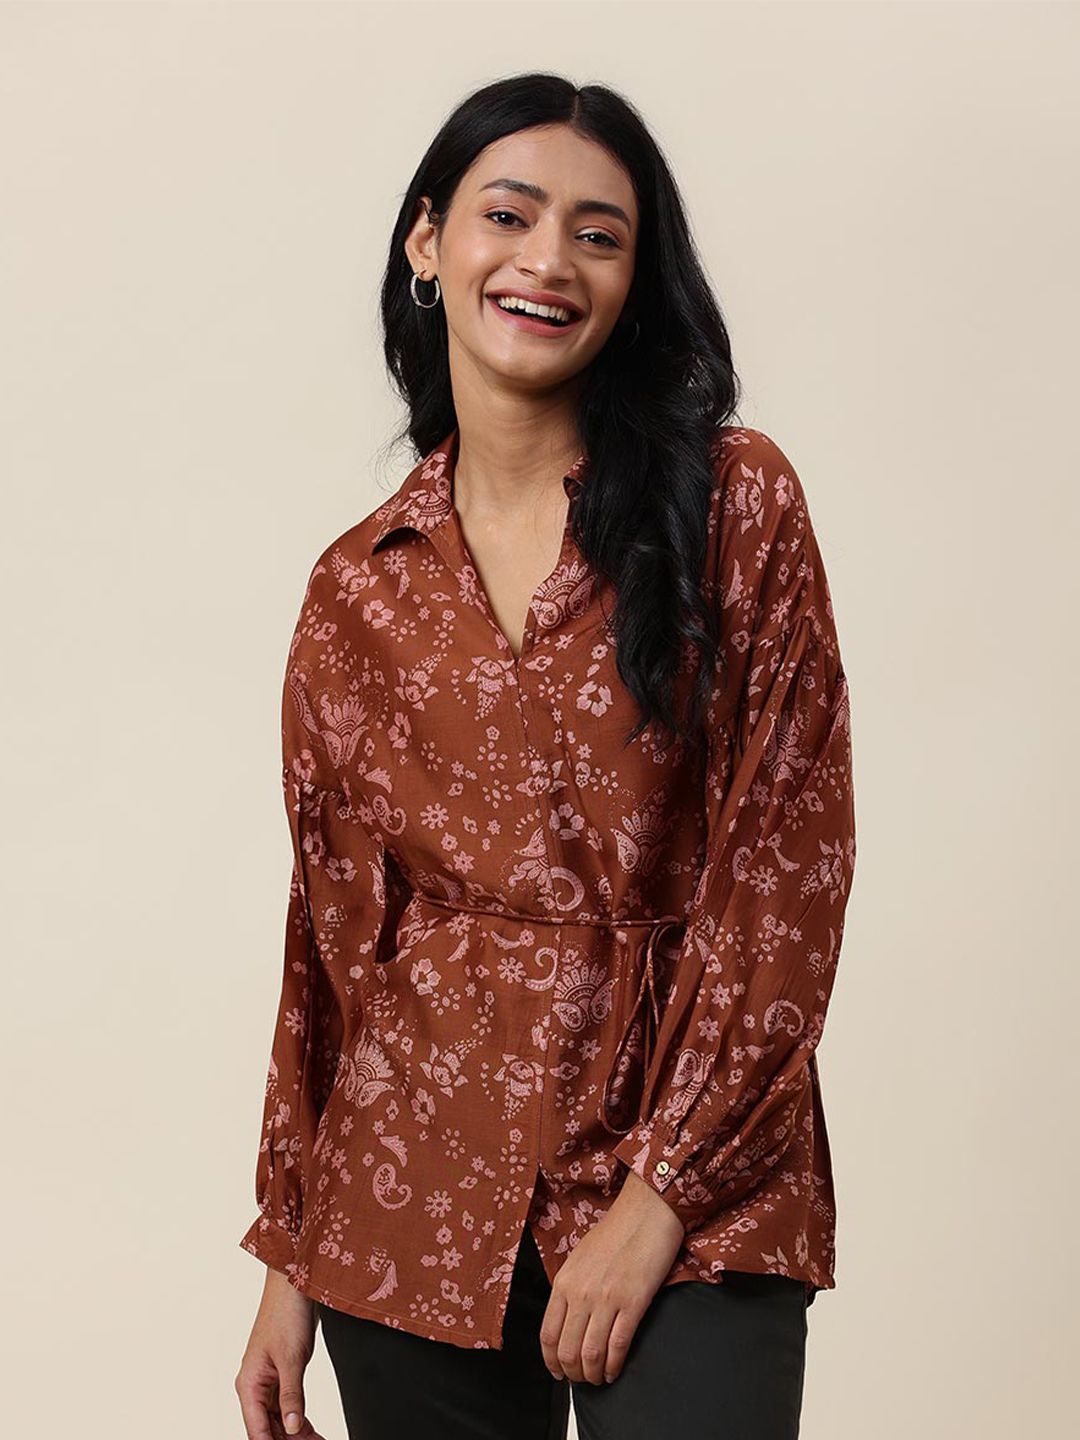 Fabindia Brown Floral Print Shirt Style Top Price in India